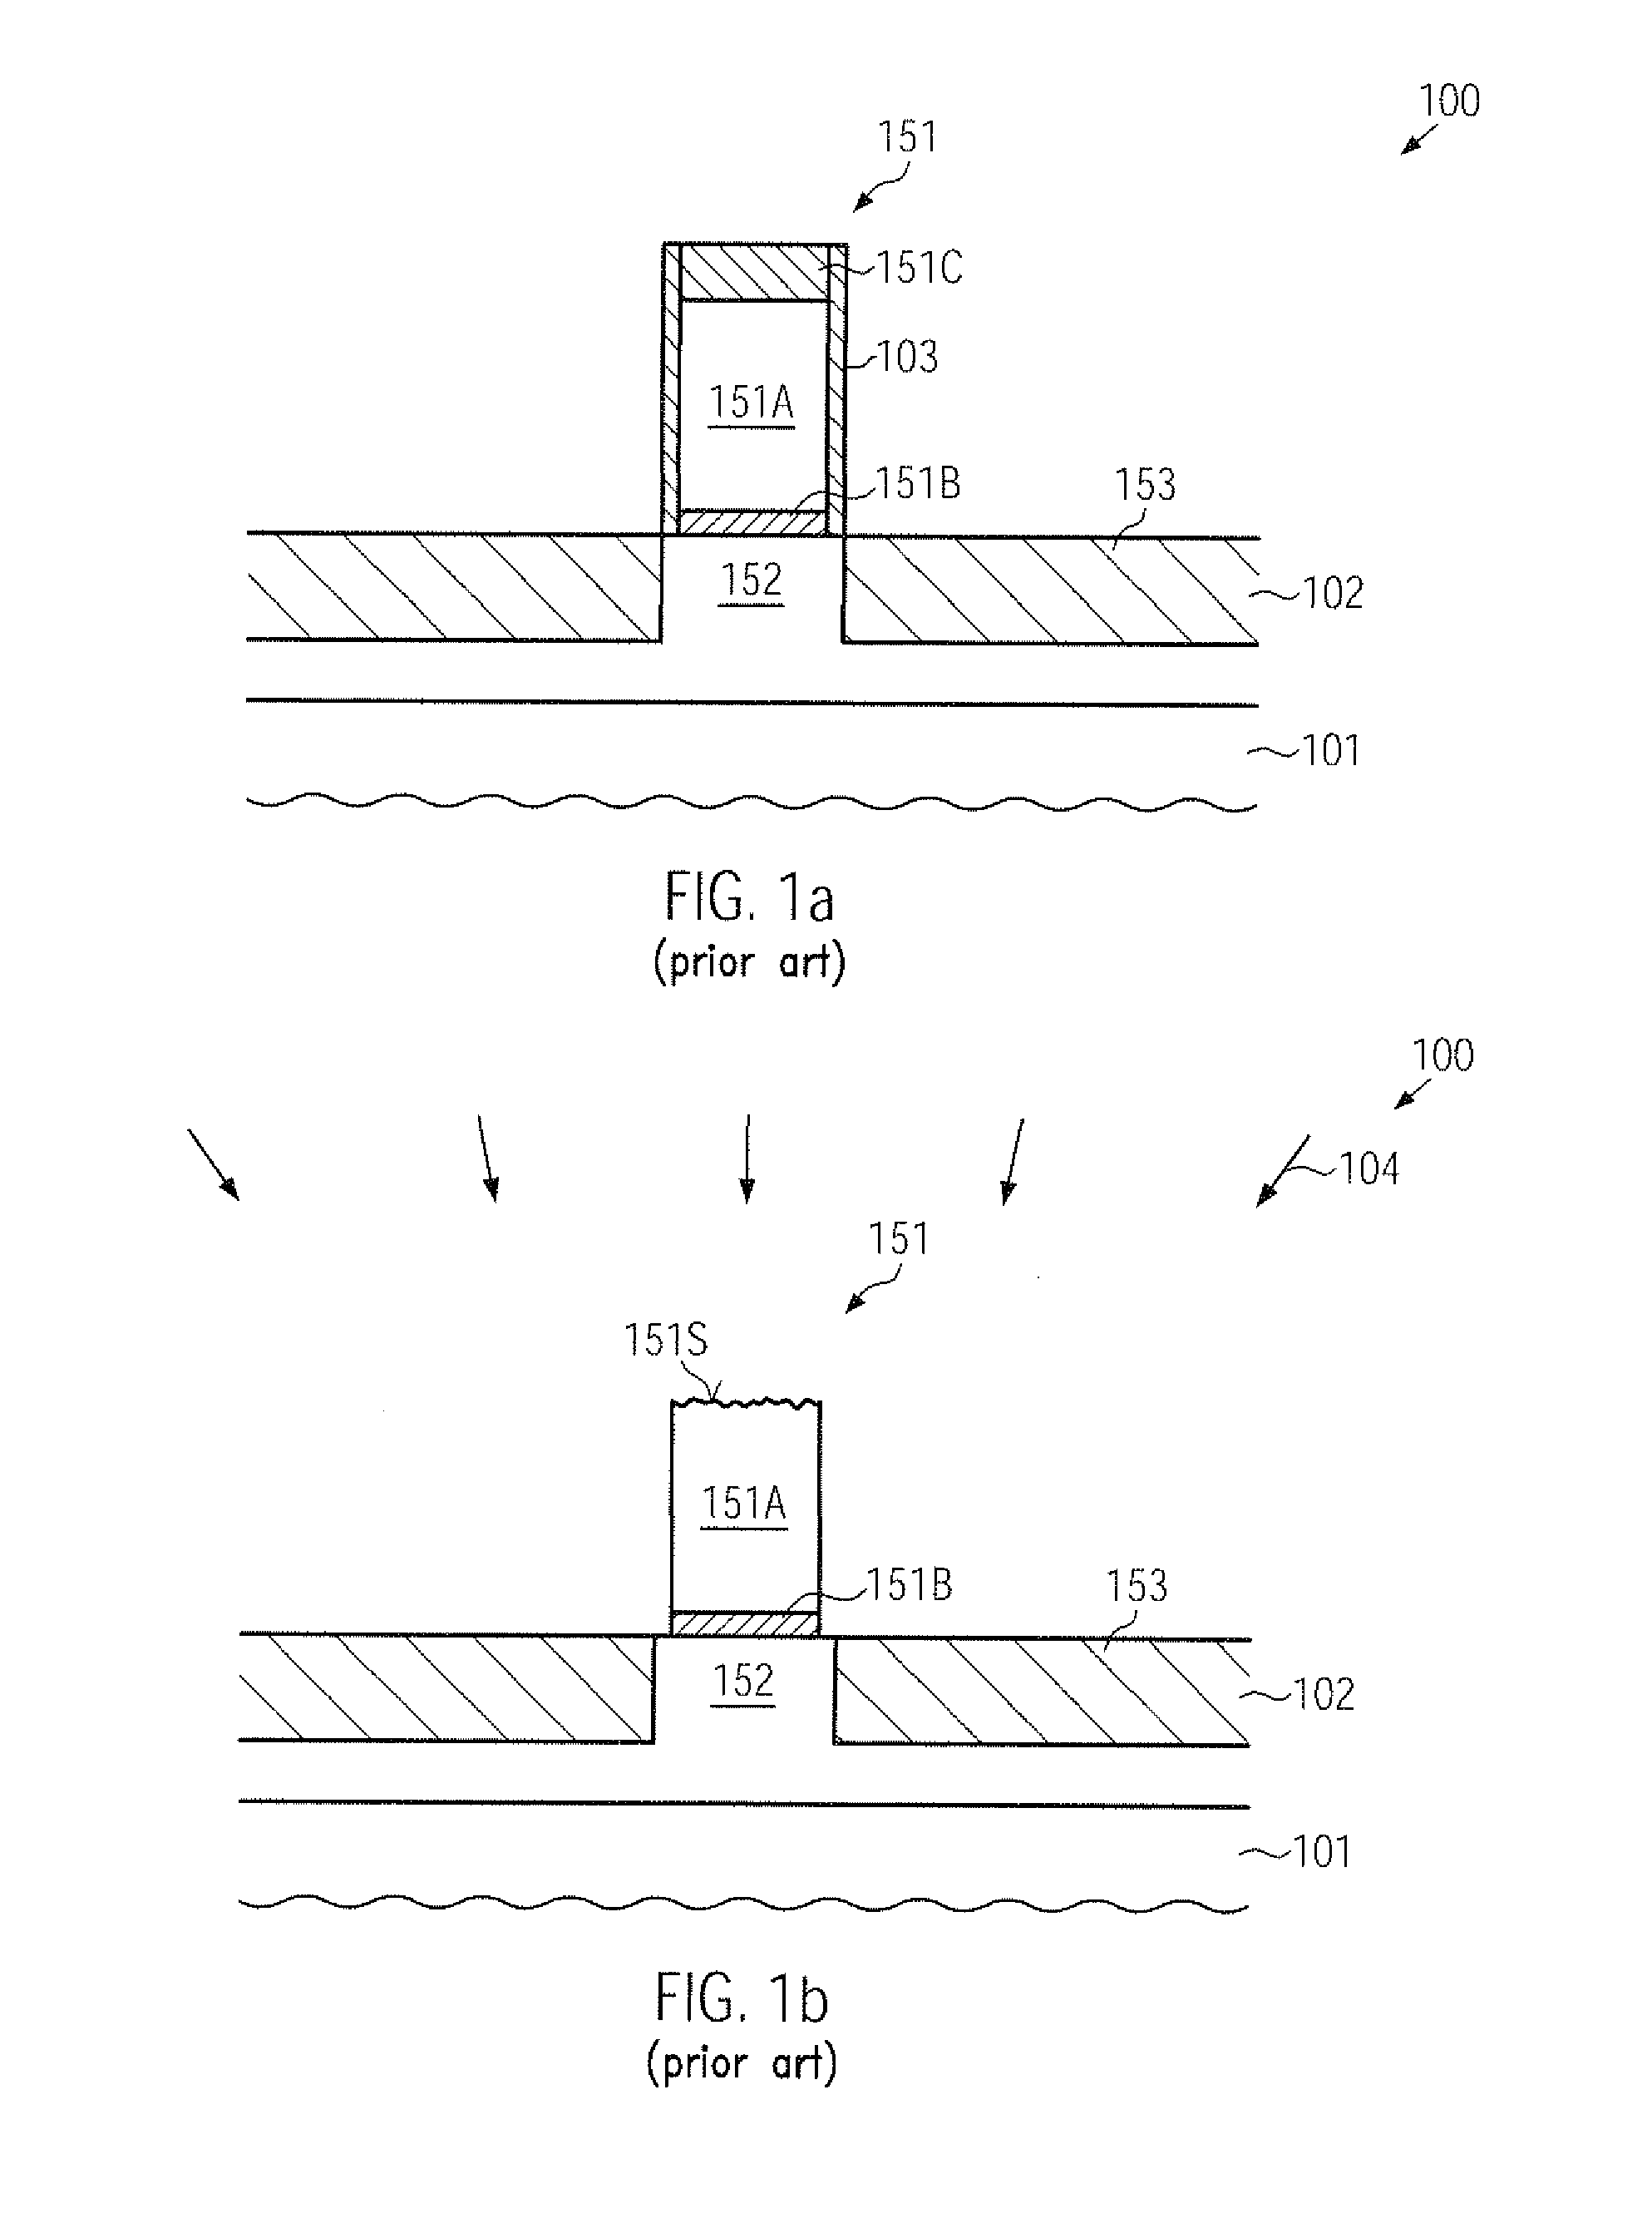 Enhanced etch stop capability during patterning of silicon nitride including layer stacks by providing a chemically formed oxide layer during semiconductor processing